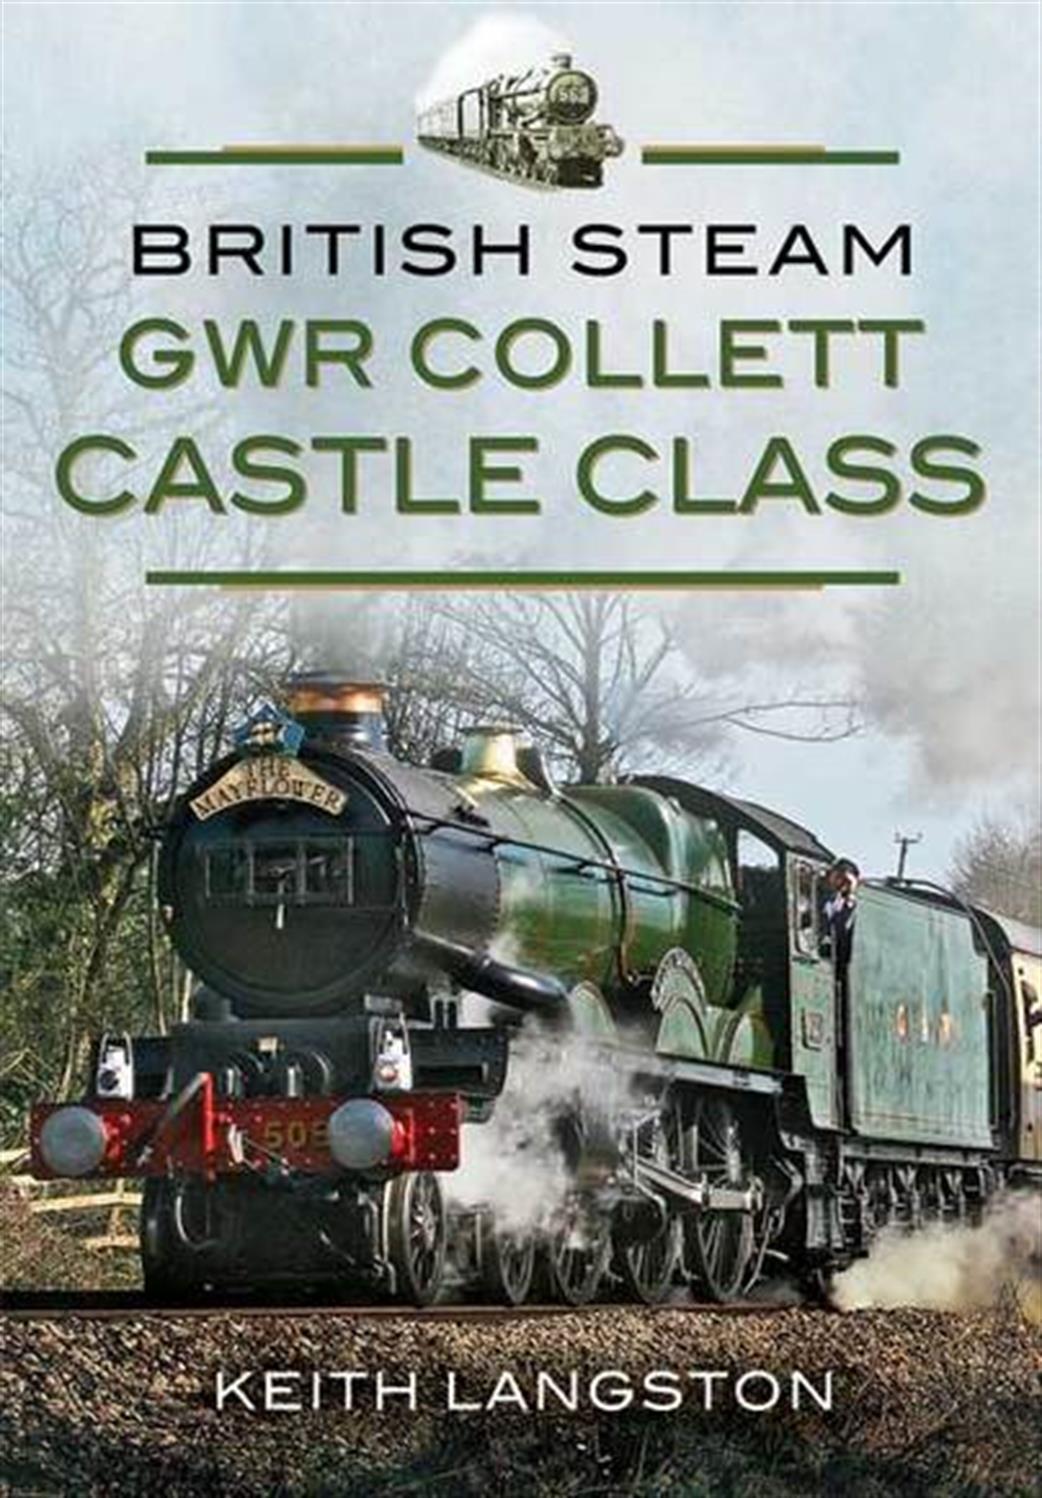 Pen & Sword  9781473823563 British Steam GWR Collett Castle Class by Keith Langstone.